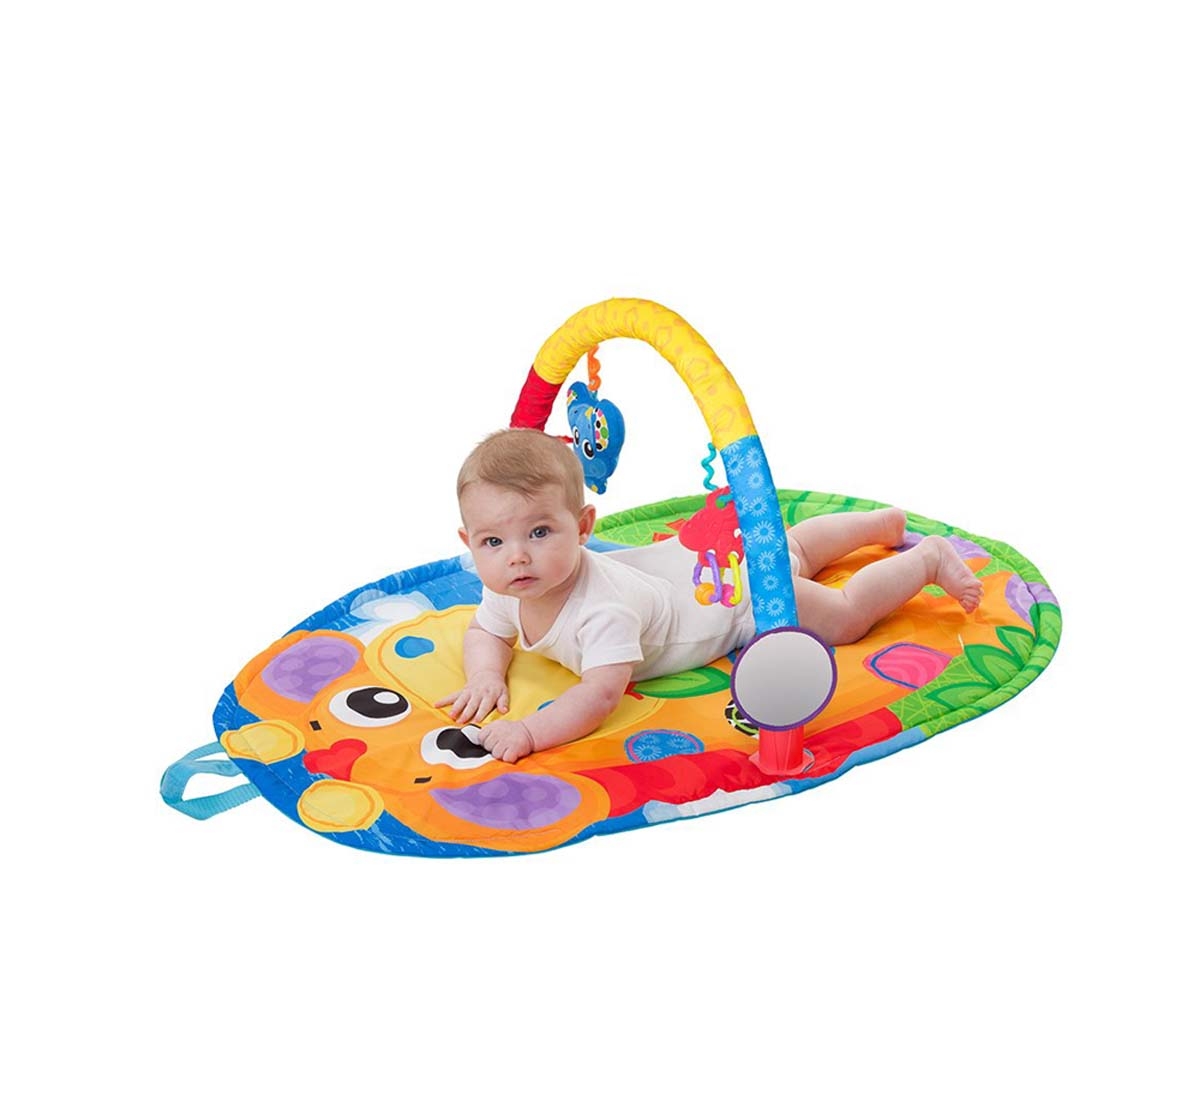 Playgro | Playgro Jerry Giraffe Activity Gym Baby Gear for Kids age 0M+ 0